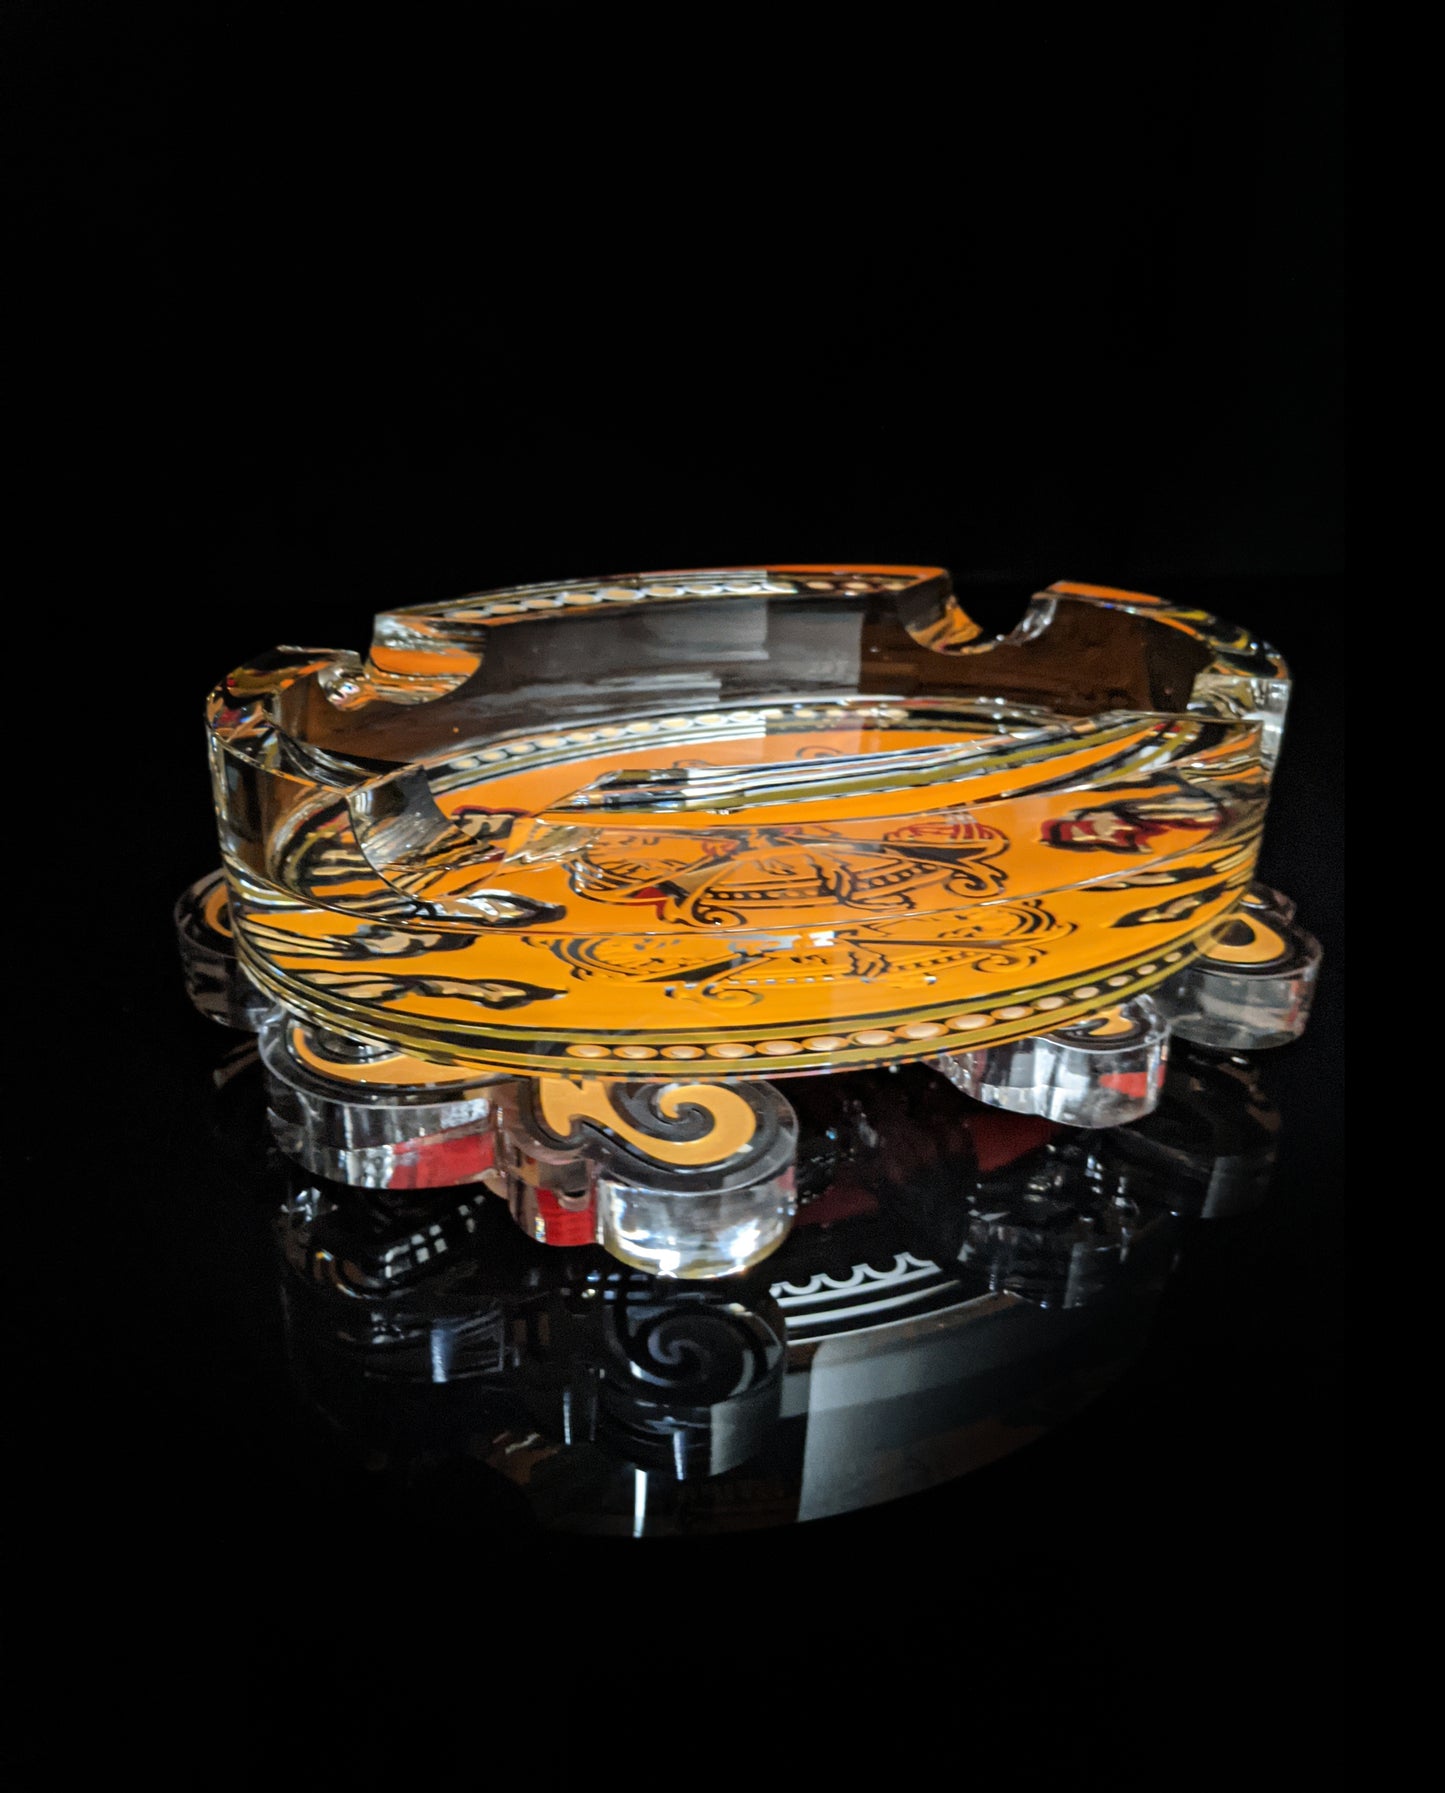 Fuente OpusX Limited Edition ashtray